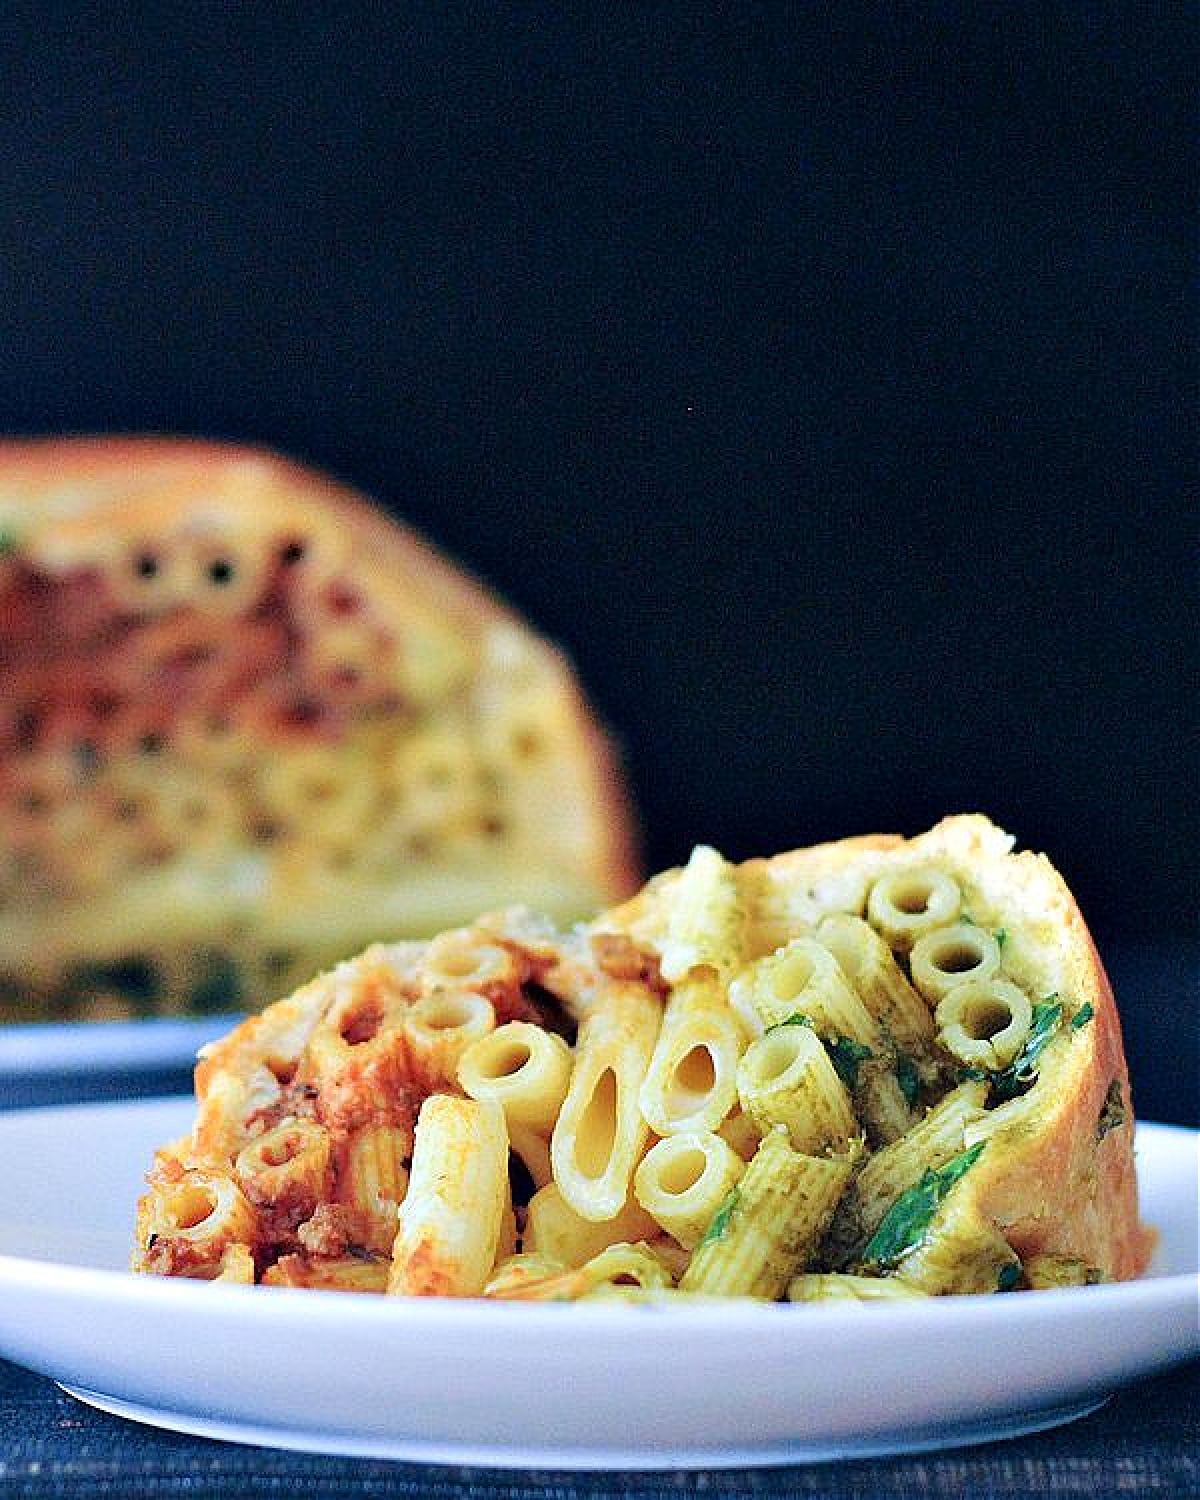 A single serving of timpano on a plate in front of the platter of a full timpano. Timpano is a large pastry dome filled with pasta: a red marinara layer of penne pasta on top, a middle layer of white Alfredo pasta, and a bottom layer of green pesto pasta.